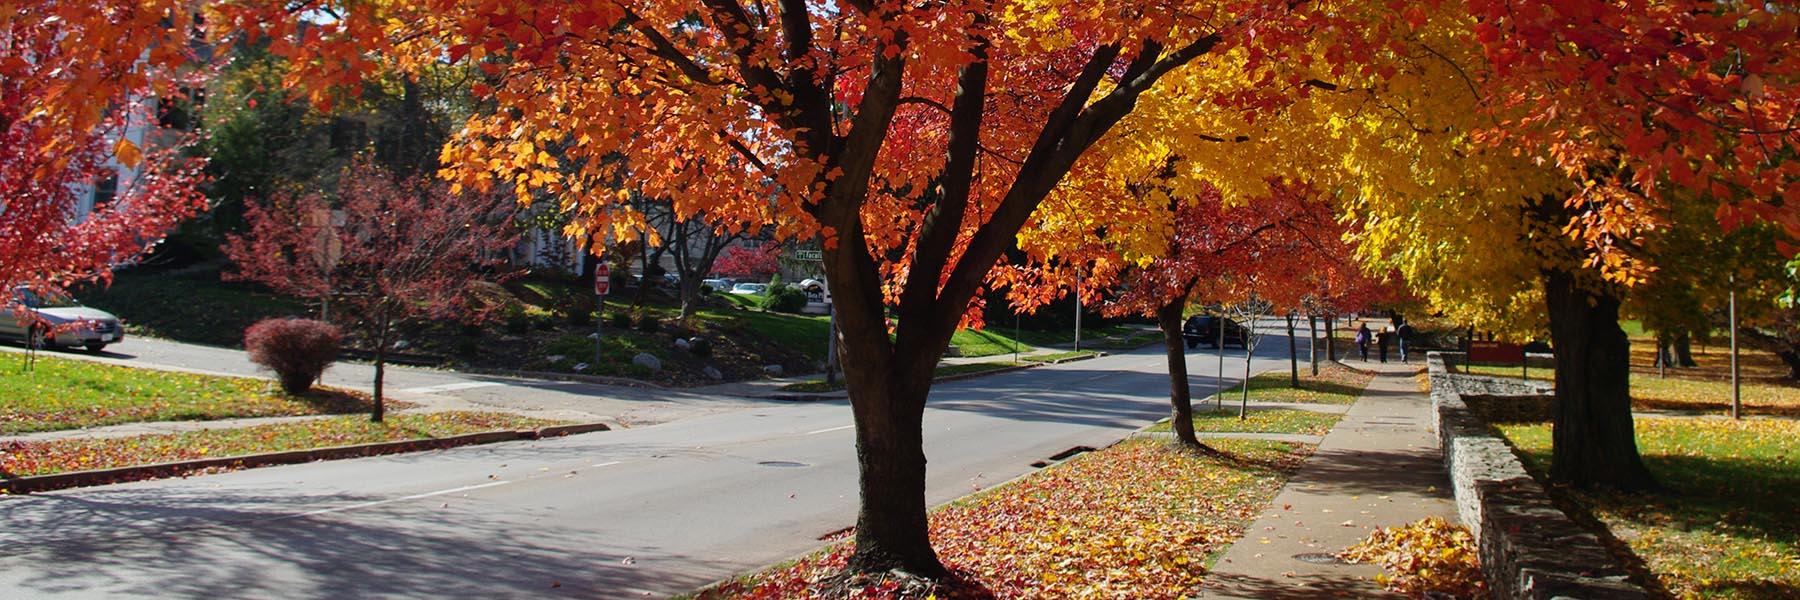 Credit: Steven W., free to use/share. Autumn at IU. https://www.flickr.com/photos/helloeveryone123/4099895746